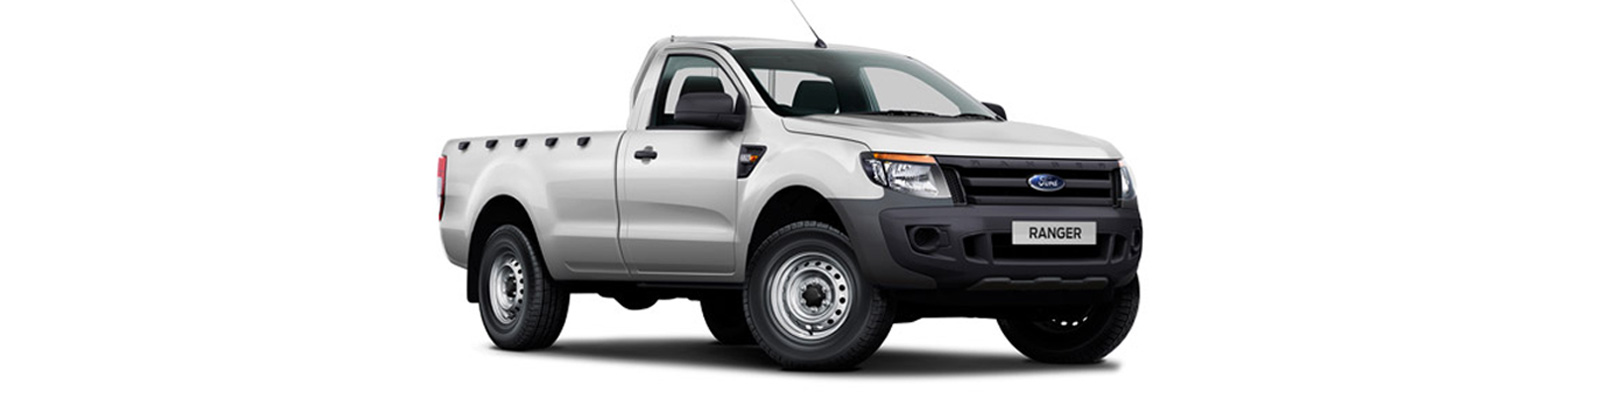 Accessories For The Ford Ranger Regular Cab 2012 to 2016